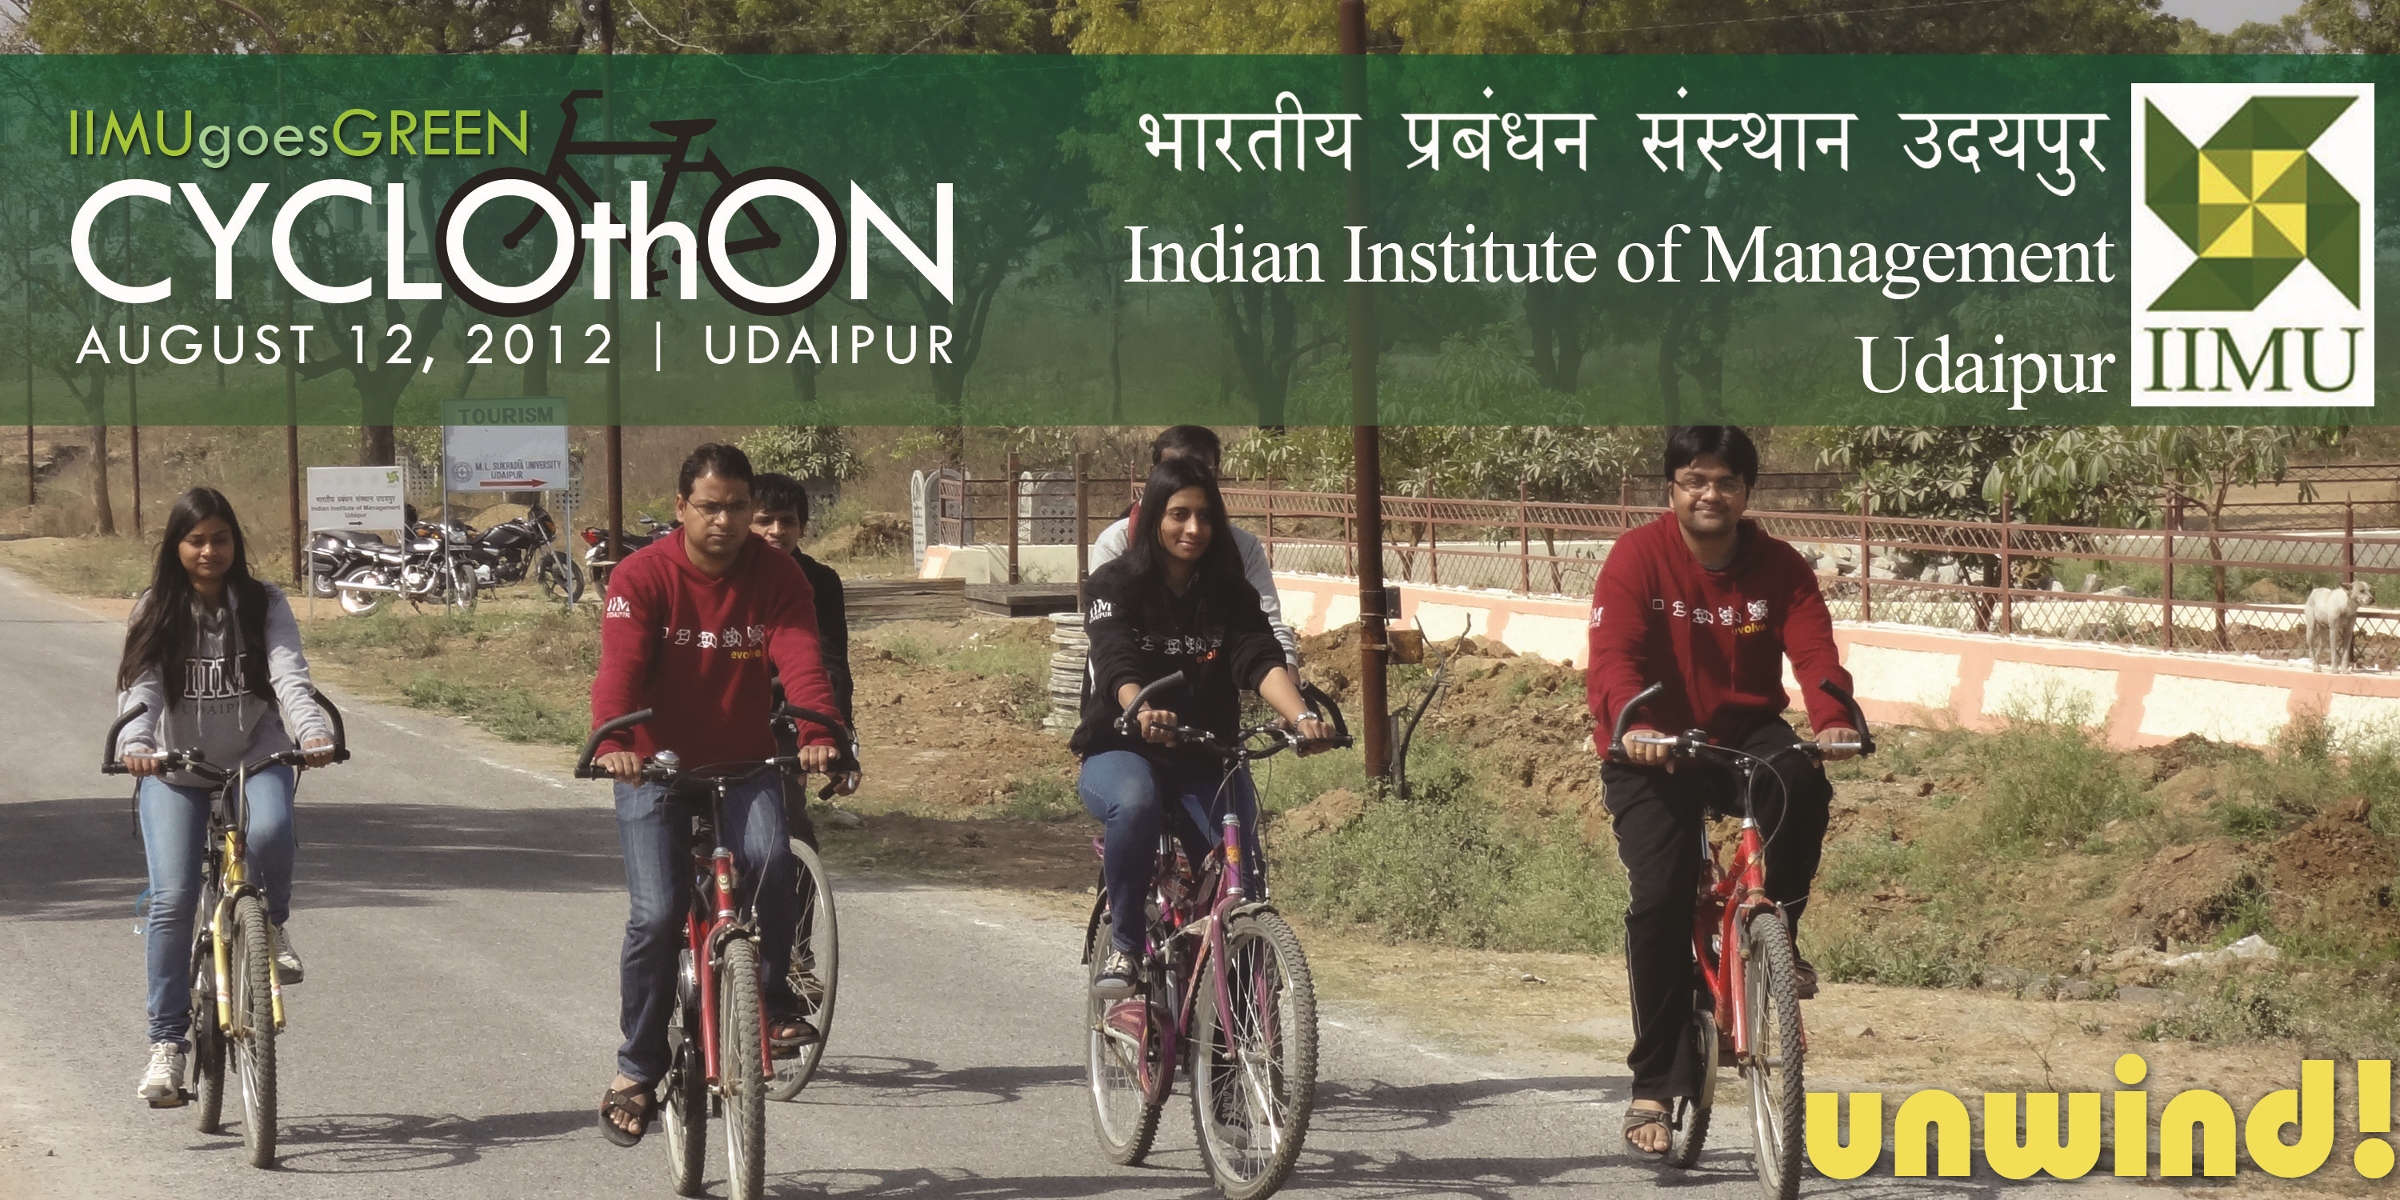 IIM-U students conduct Cycle run to spread the Green message in Udaipur